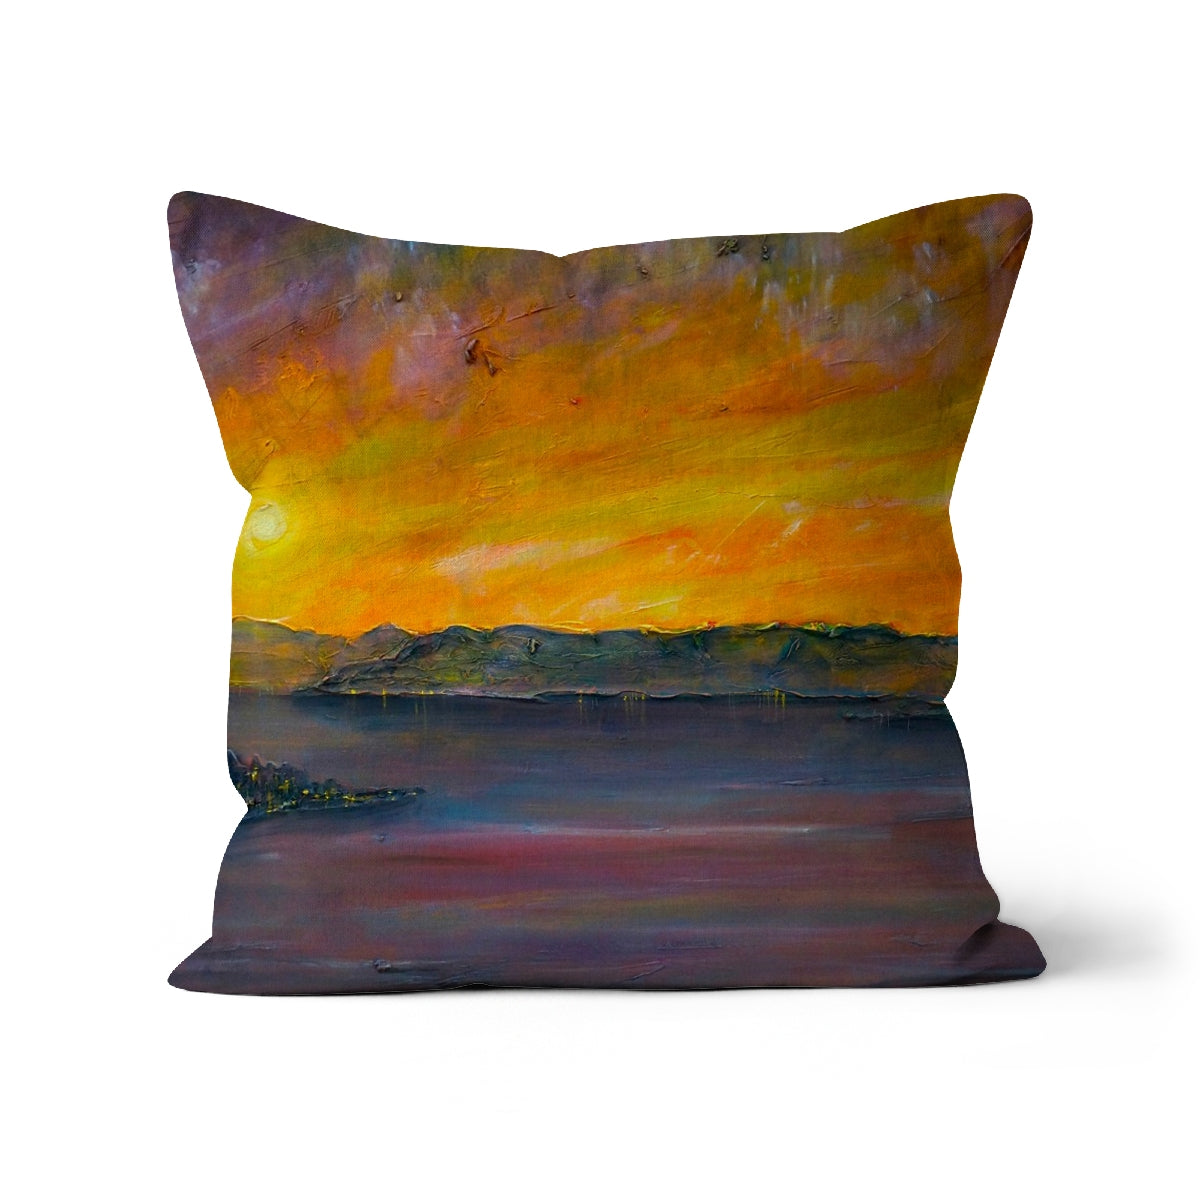 Sunset Over Gourock Art Gifts Cushion-Cushions-River Clyde Art Gallery-Faux Suede-18"x18"-Paintings, Prints, Homeware, Art Gifts From Scotland By Scottish Artist Kevin Hunter